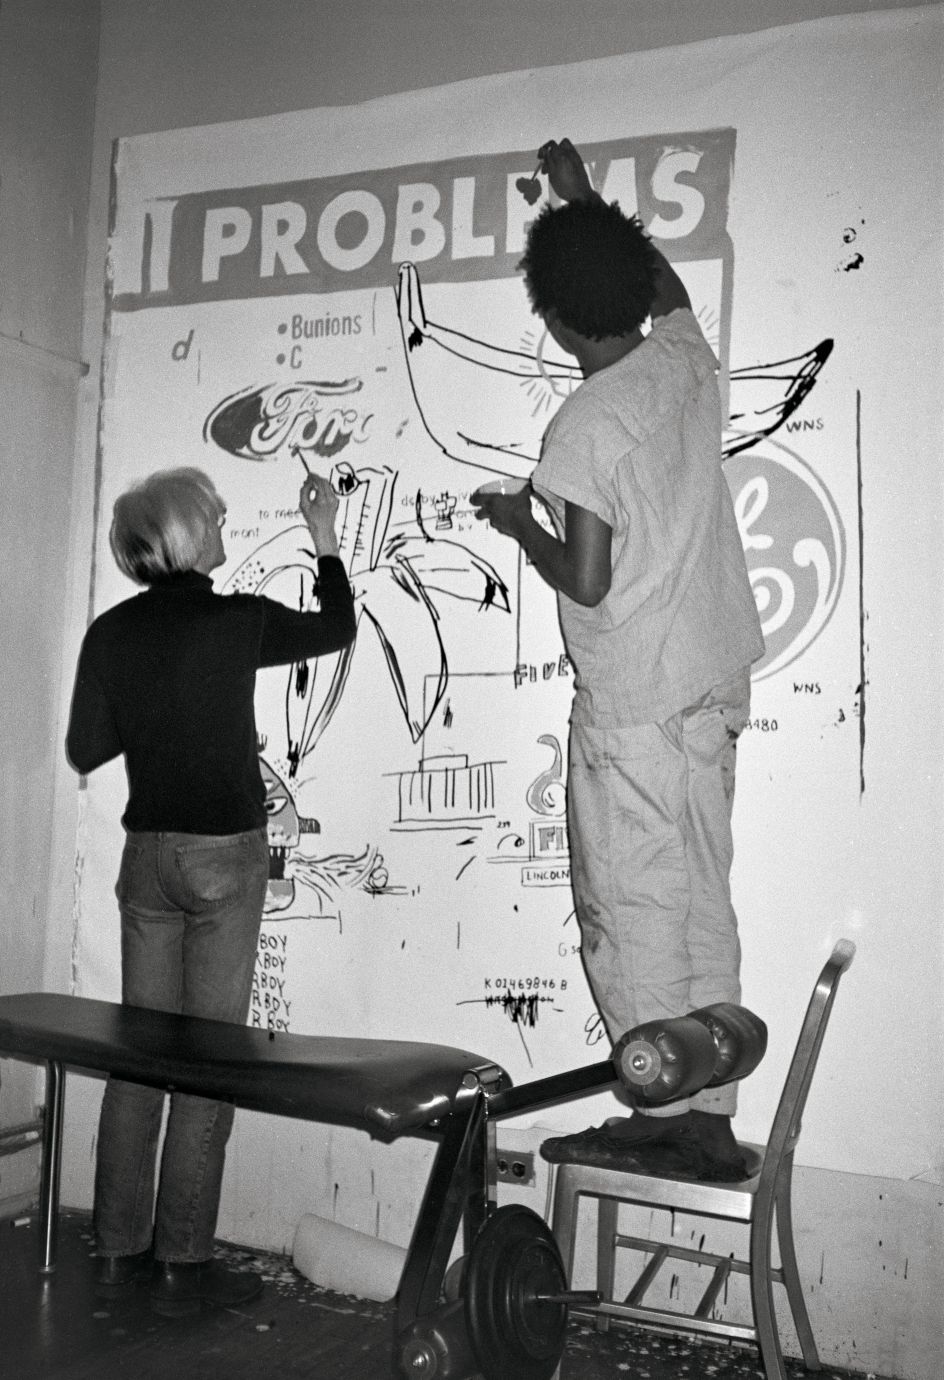 Andy and Jean Michel painting Problems at Andy’s studio at 860 Broadway, March 27, 1984. Copyright: © The Andy Warhol Foundation for the Visual Arts, Inc.